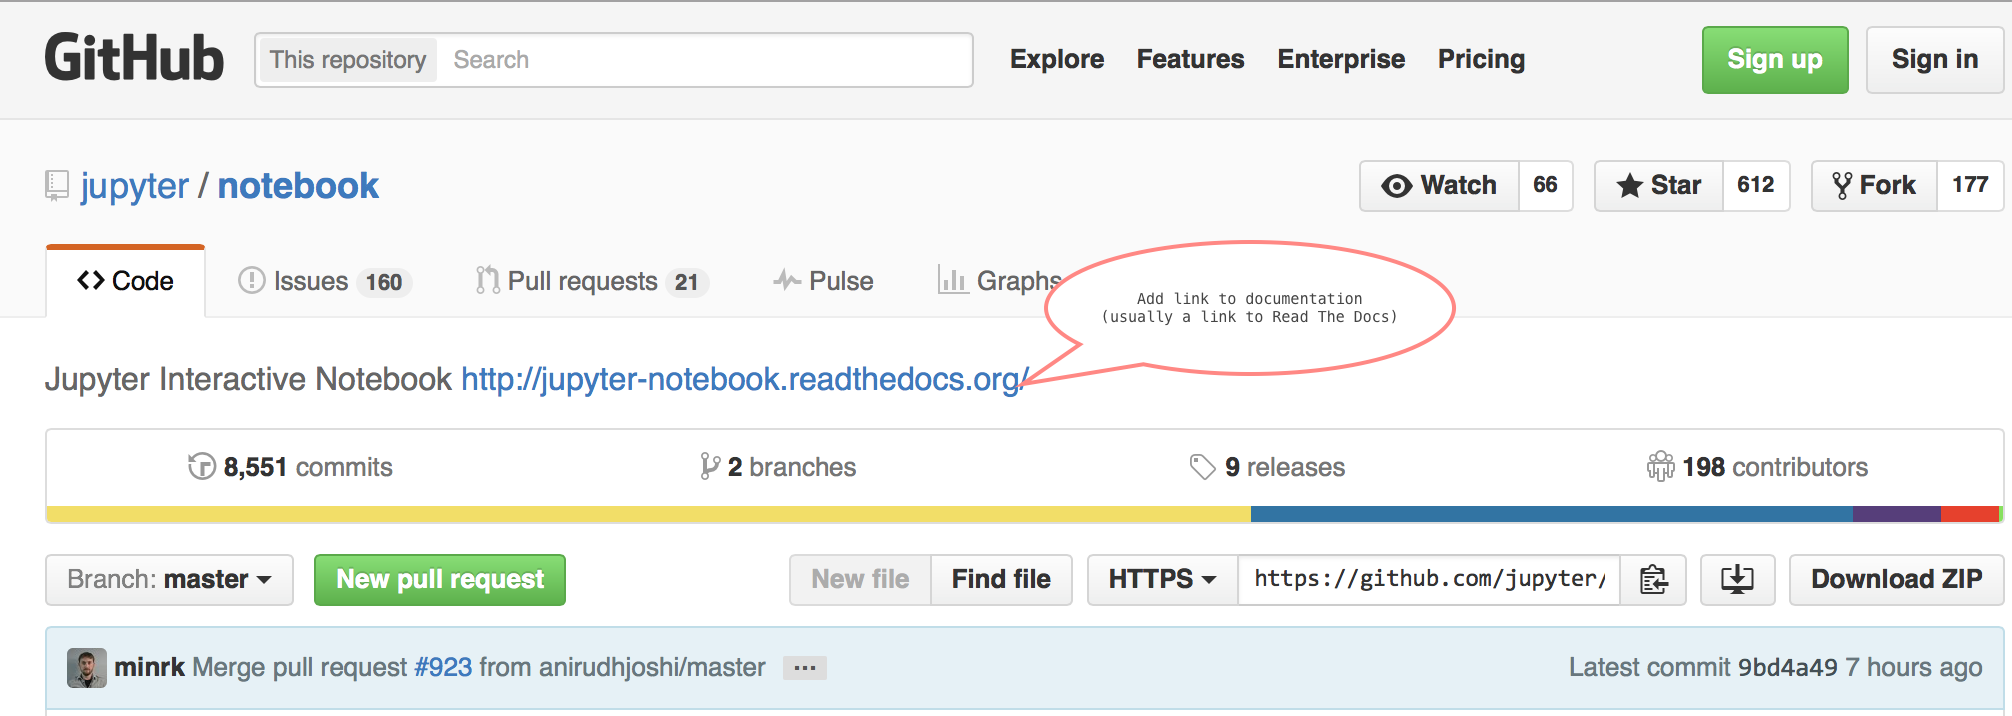 Documentation link in GitHub jupyter/notebook repo description annotated with a red speech bubble reading "Add link to documentation (usually a link to Read the Docs.)")